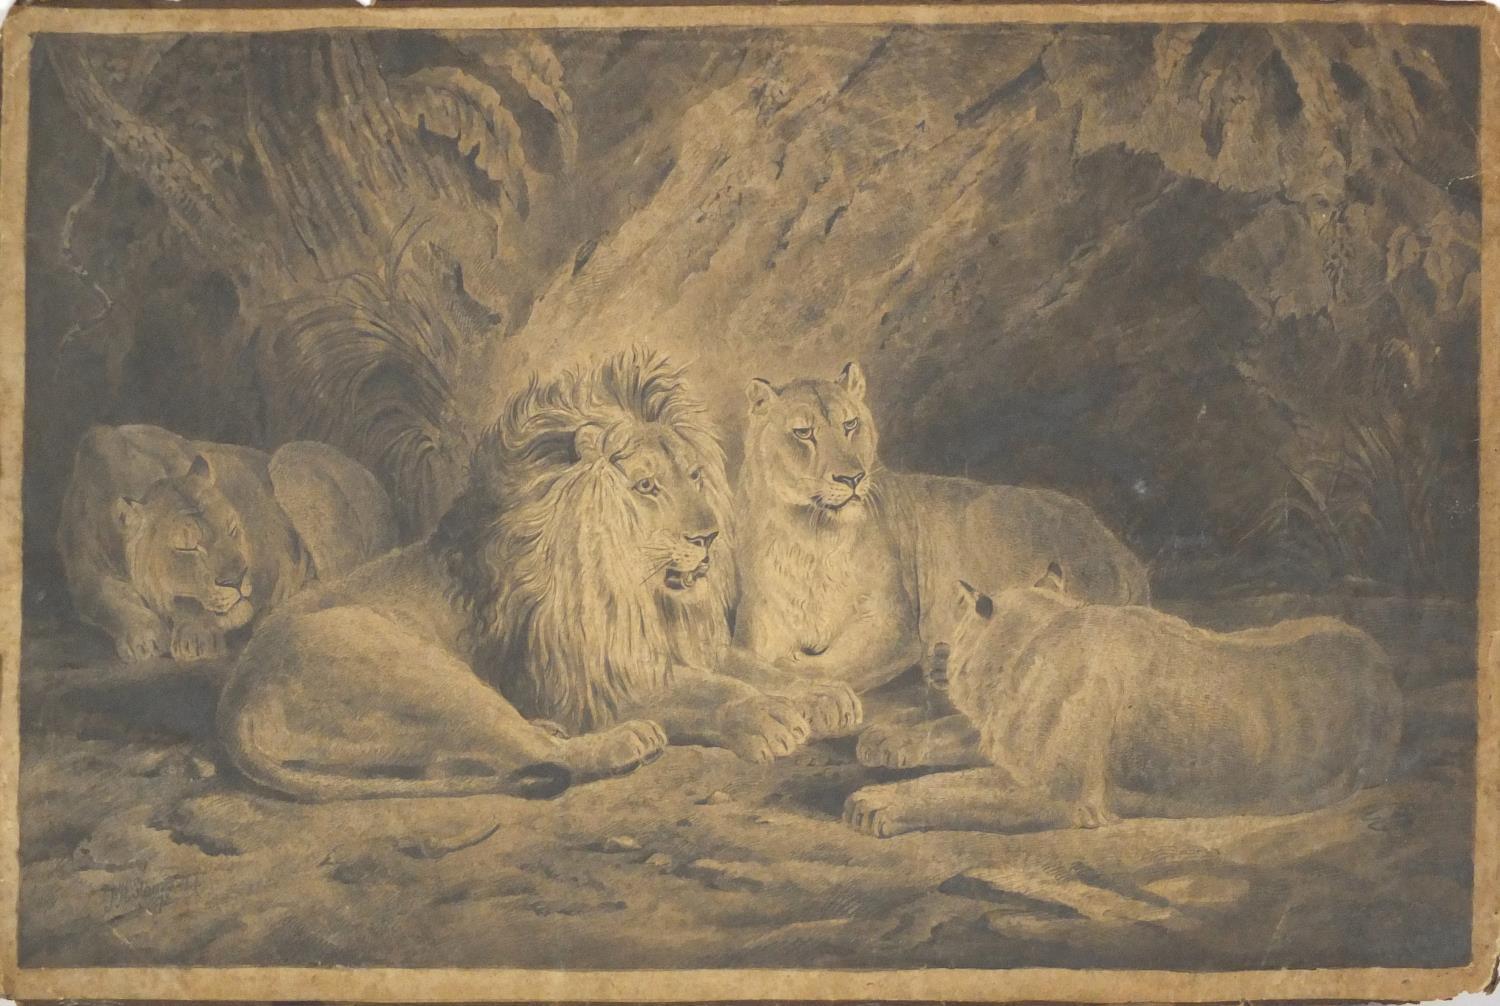 PH Staines 1873 -Well detailed pencil drawing- Pride of Lions, 56cm x 35cm : For Condition Reports - Image 2 of 4